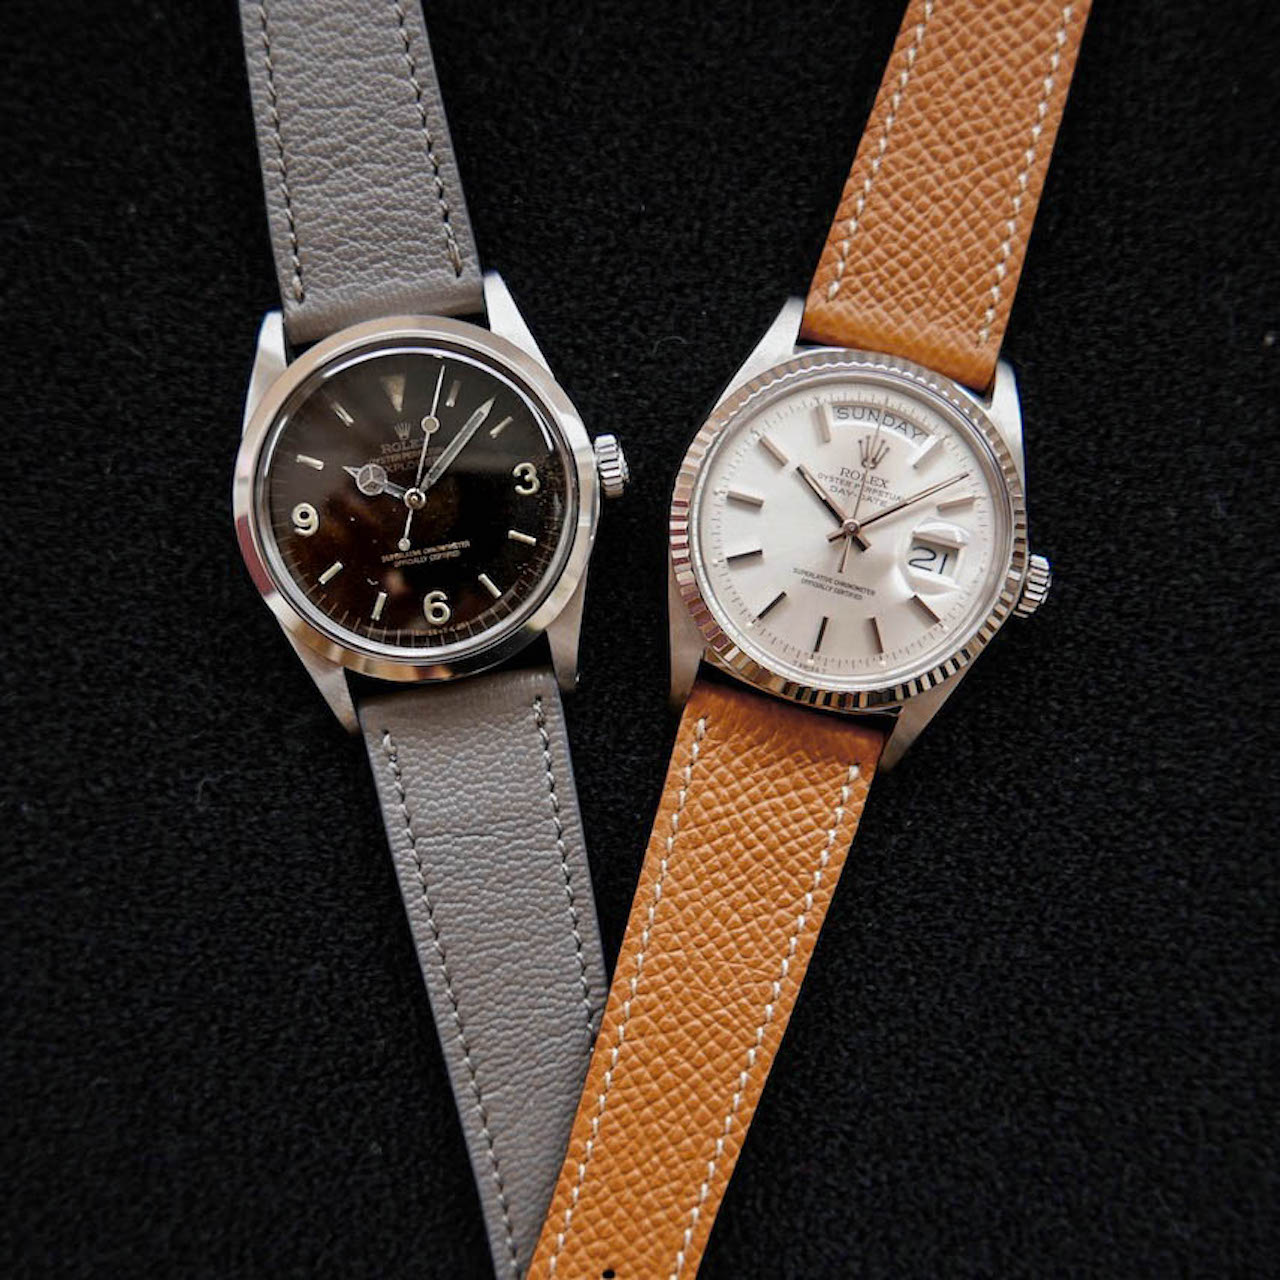 Leather strap looks like a HERMES for ROLEX SPORTS model and DAY-DATE